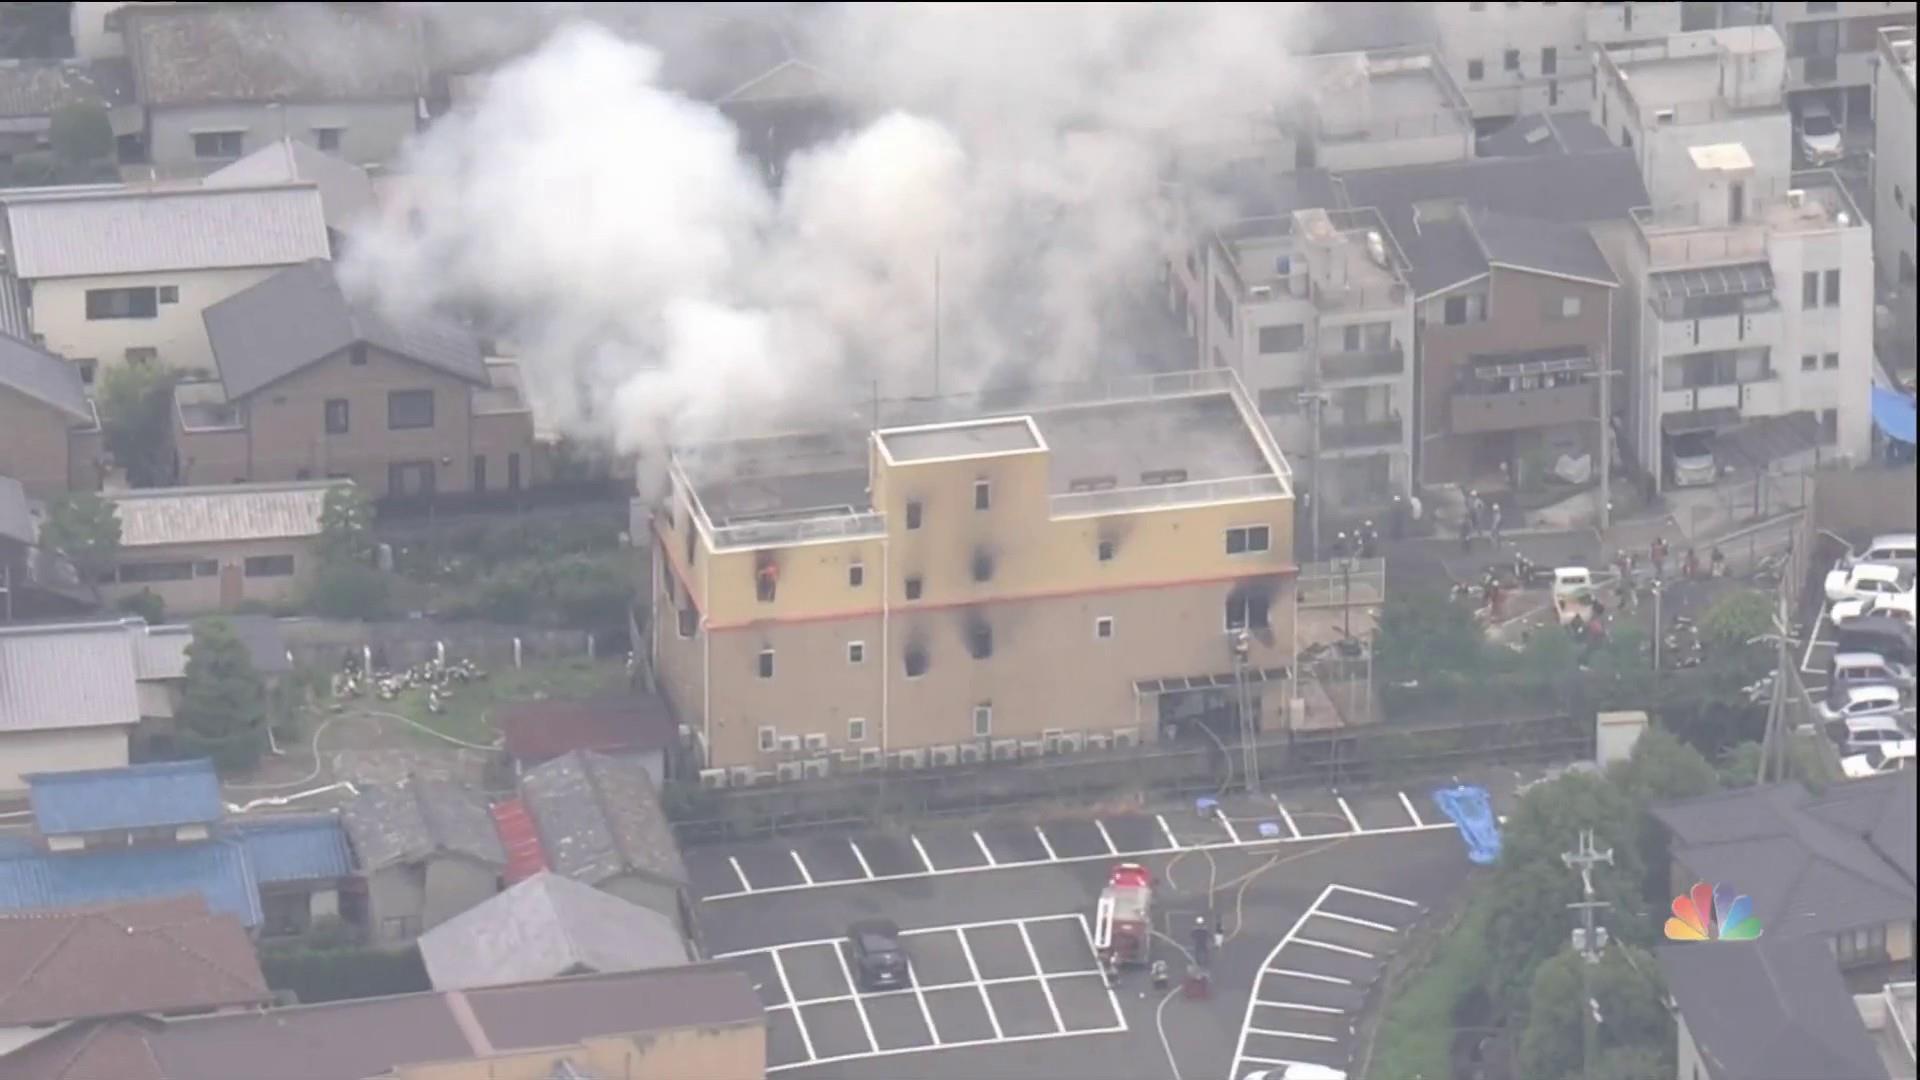 More than 30 feared dead in suspected arson at Japan animation studio